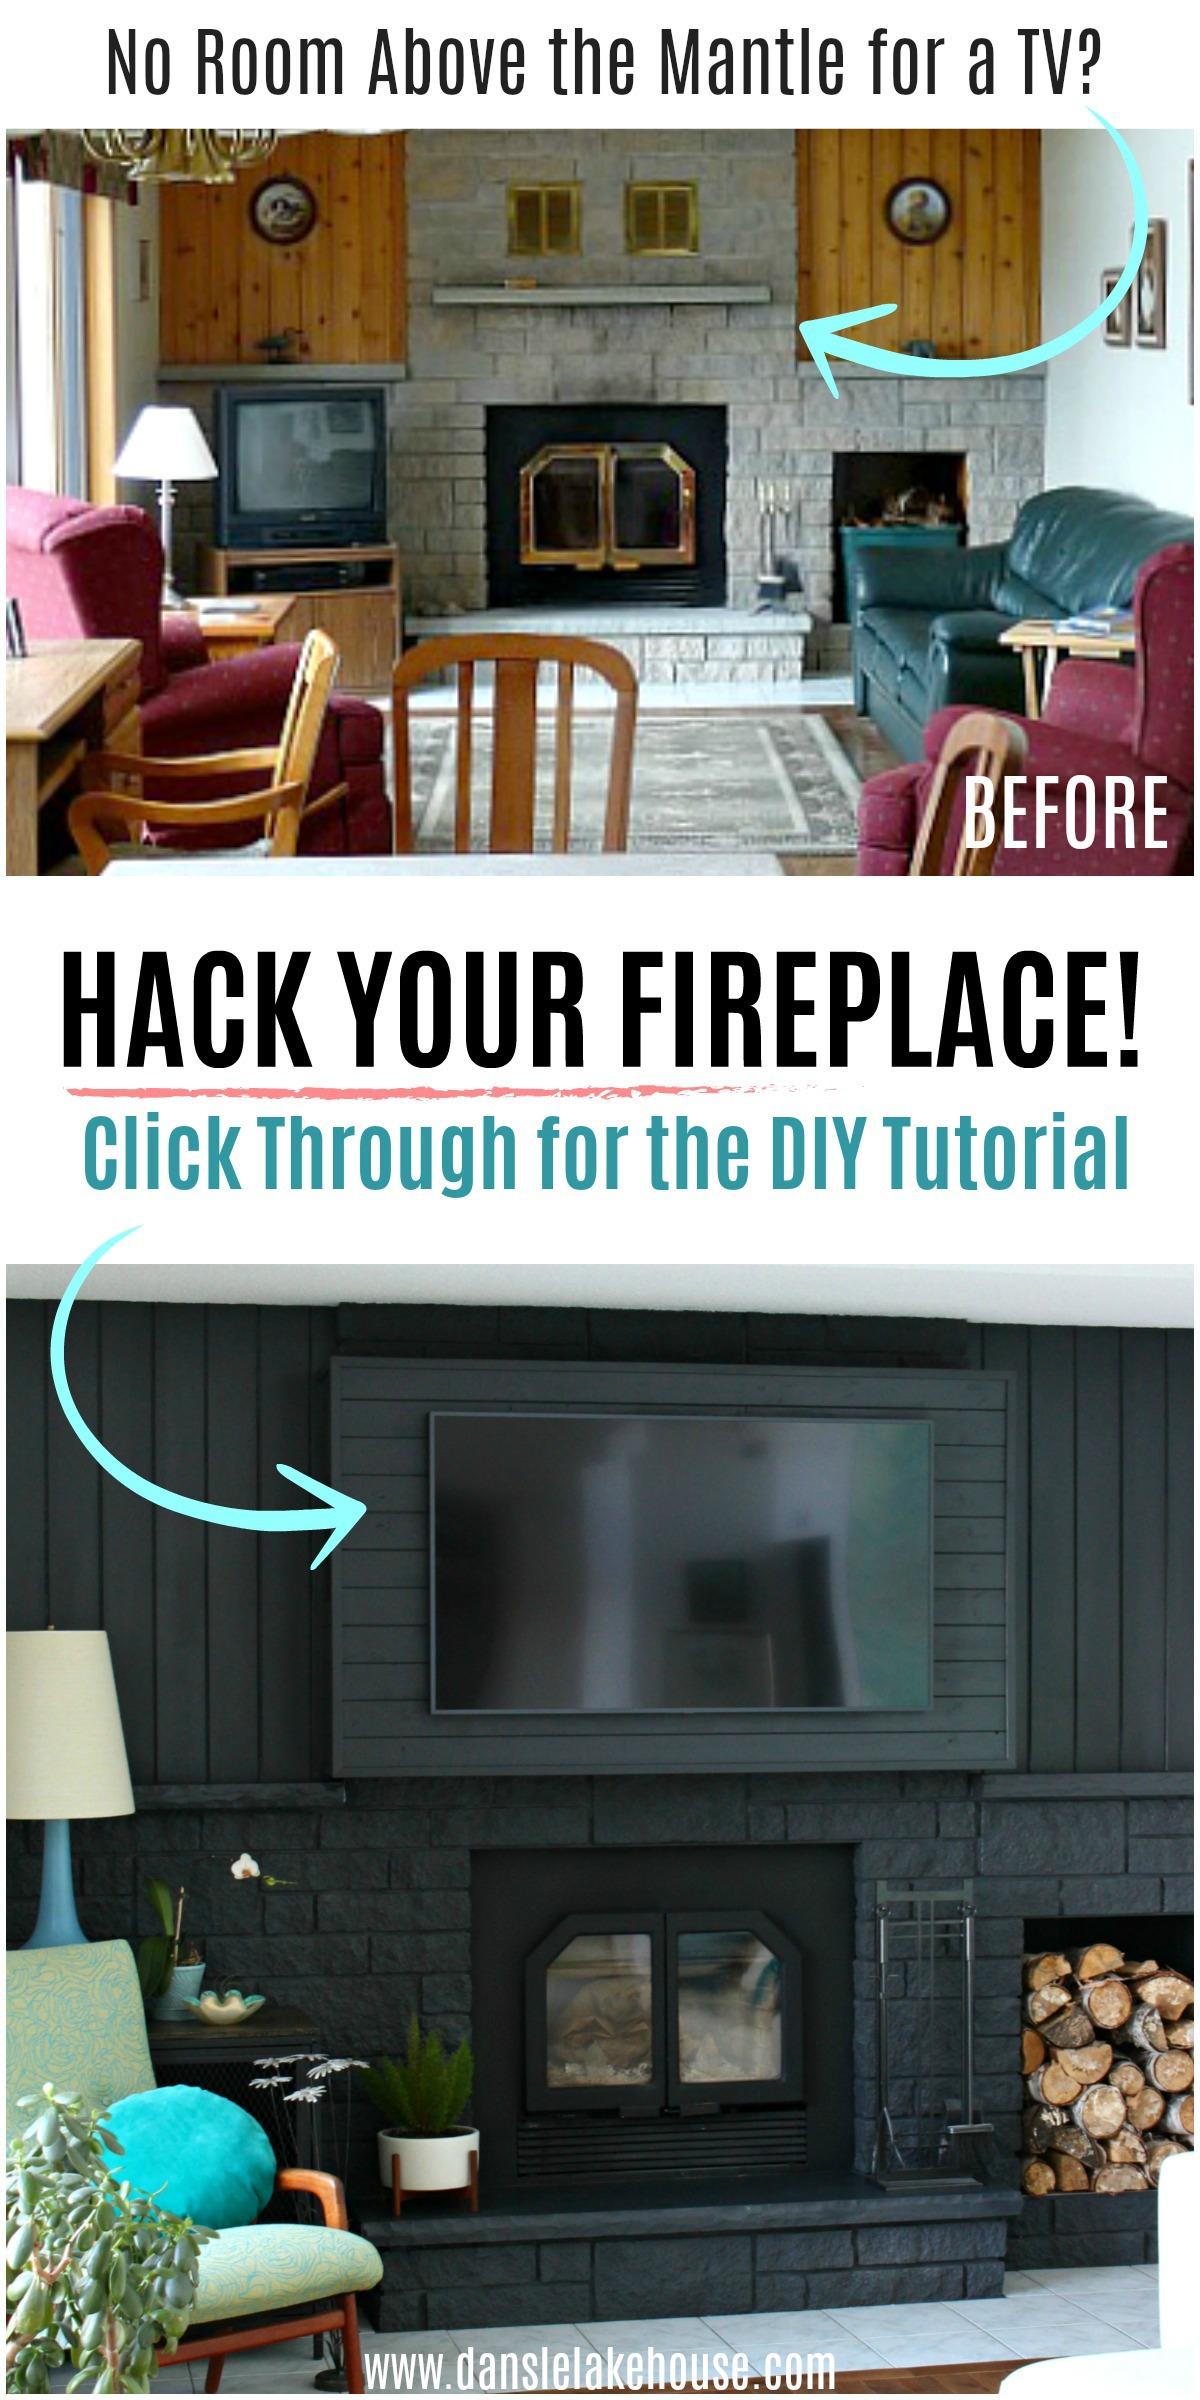 Fireplace Hack to Build a Bump Out